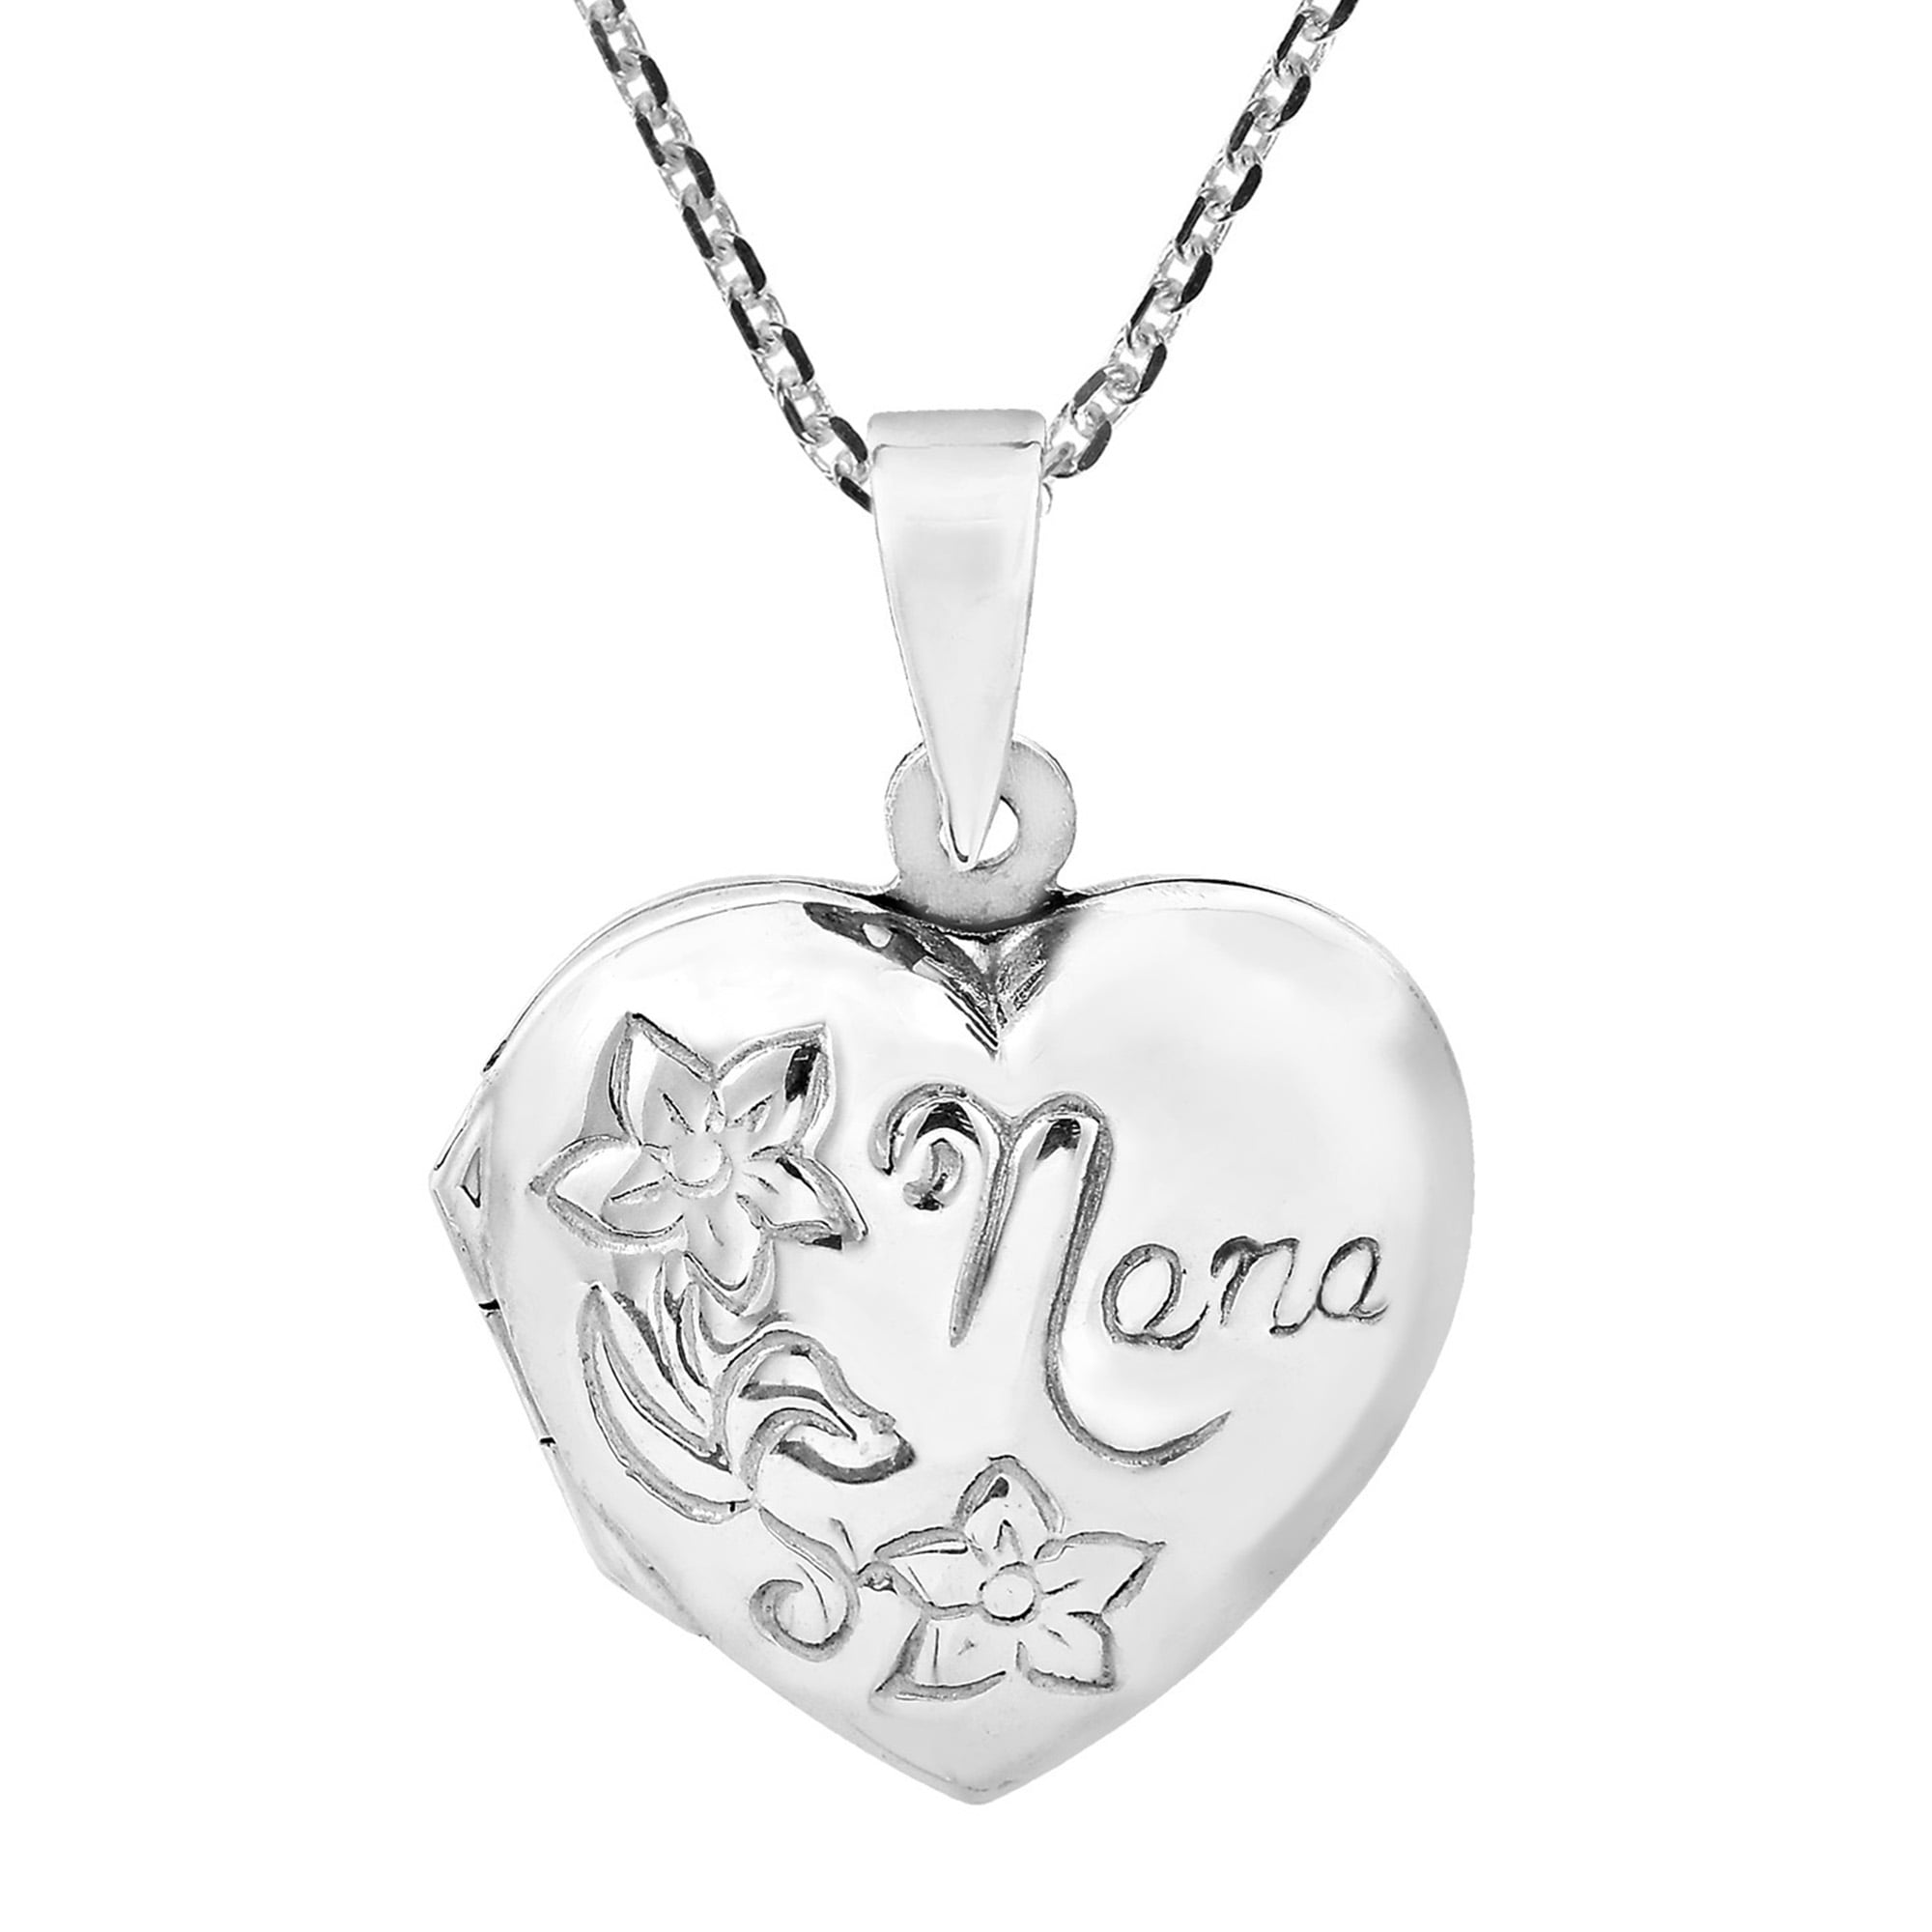 Just For You Grandma  Nana Personalised Engraved 925 Sterling Silver Necklace with Engraved Stainless Steel Heart Pendant